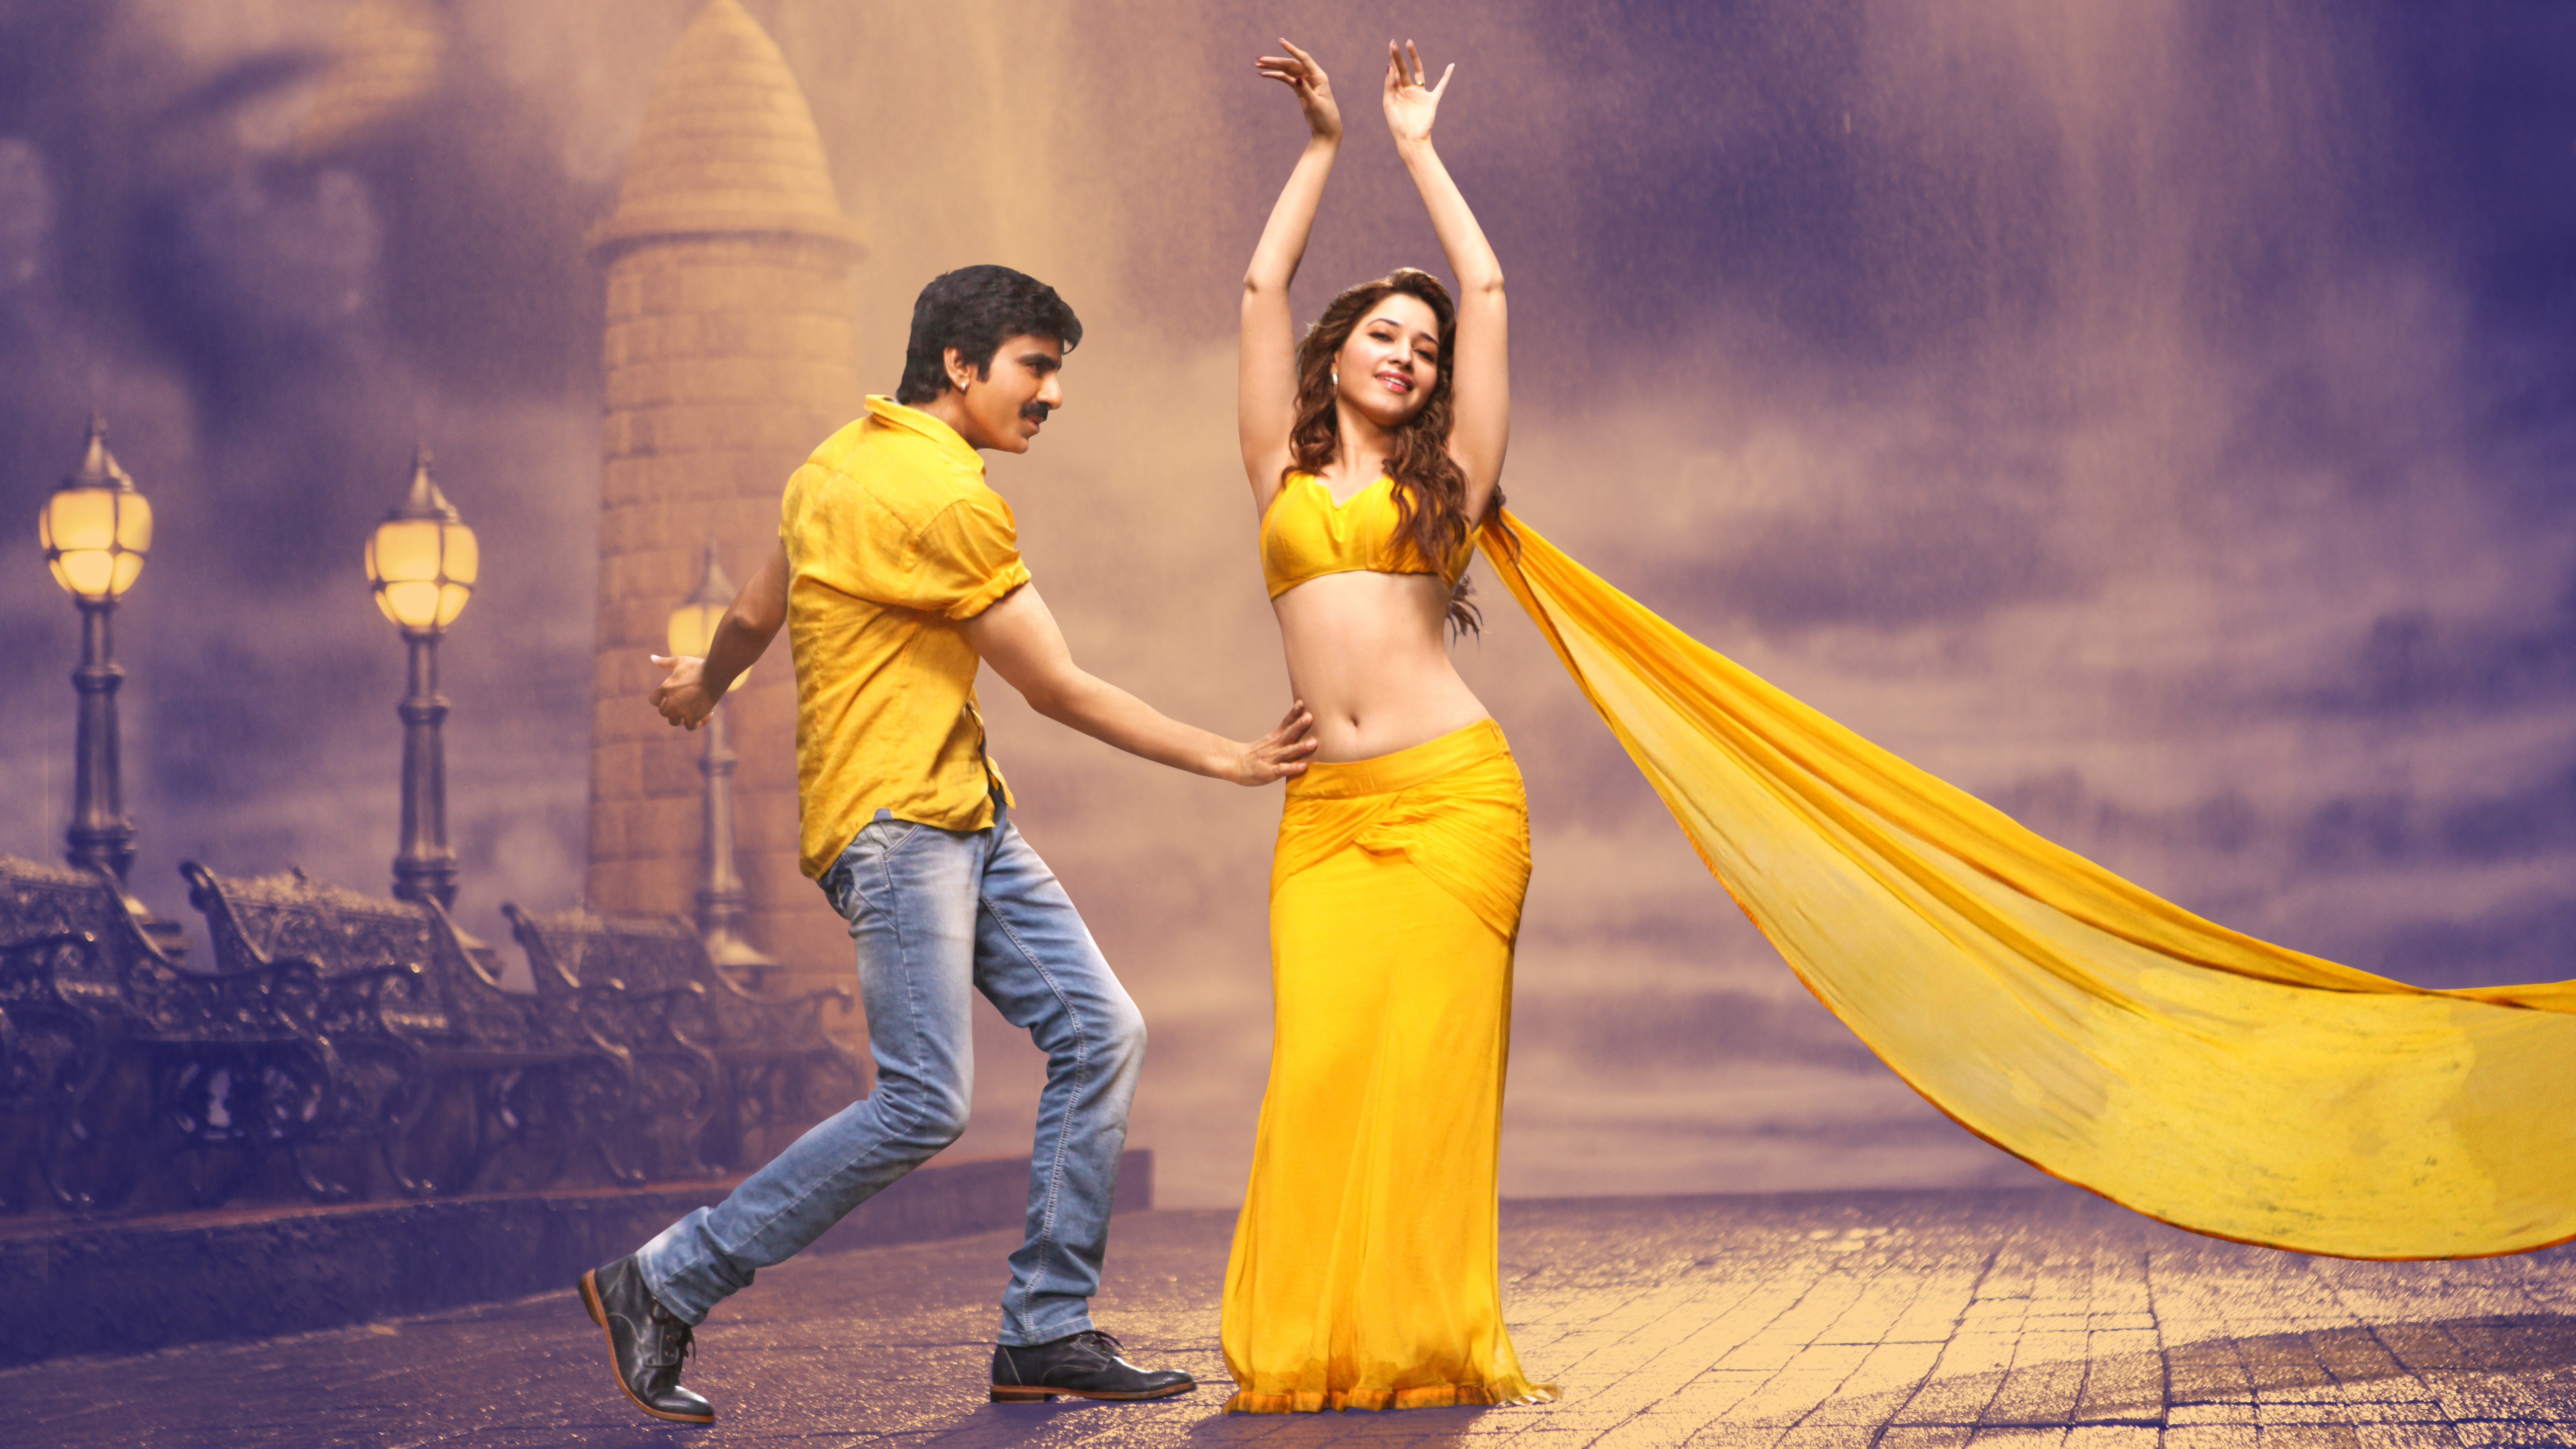 Ravi Teja Tamanna Bengal Tiger Wallpaper Tamanna Bhatia Hot Navel Touch 697591 Hd Wallpaper Backgrounds Download All the wallpapers of tamannaah bhatia in high definition quality as well as these free wallpaper photo for desktop are absolutely free. ravi teja tamanna bengal tiger